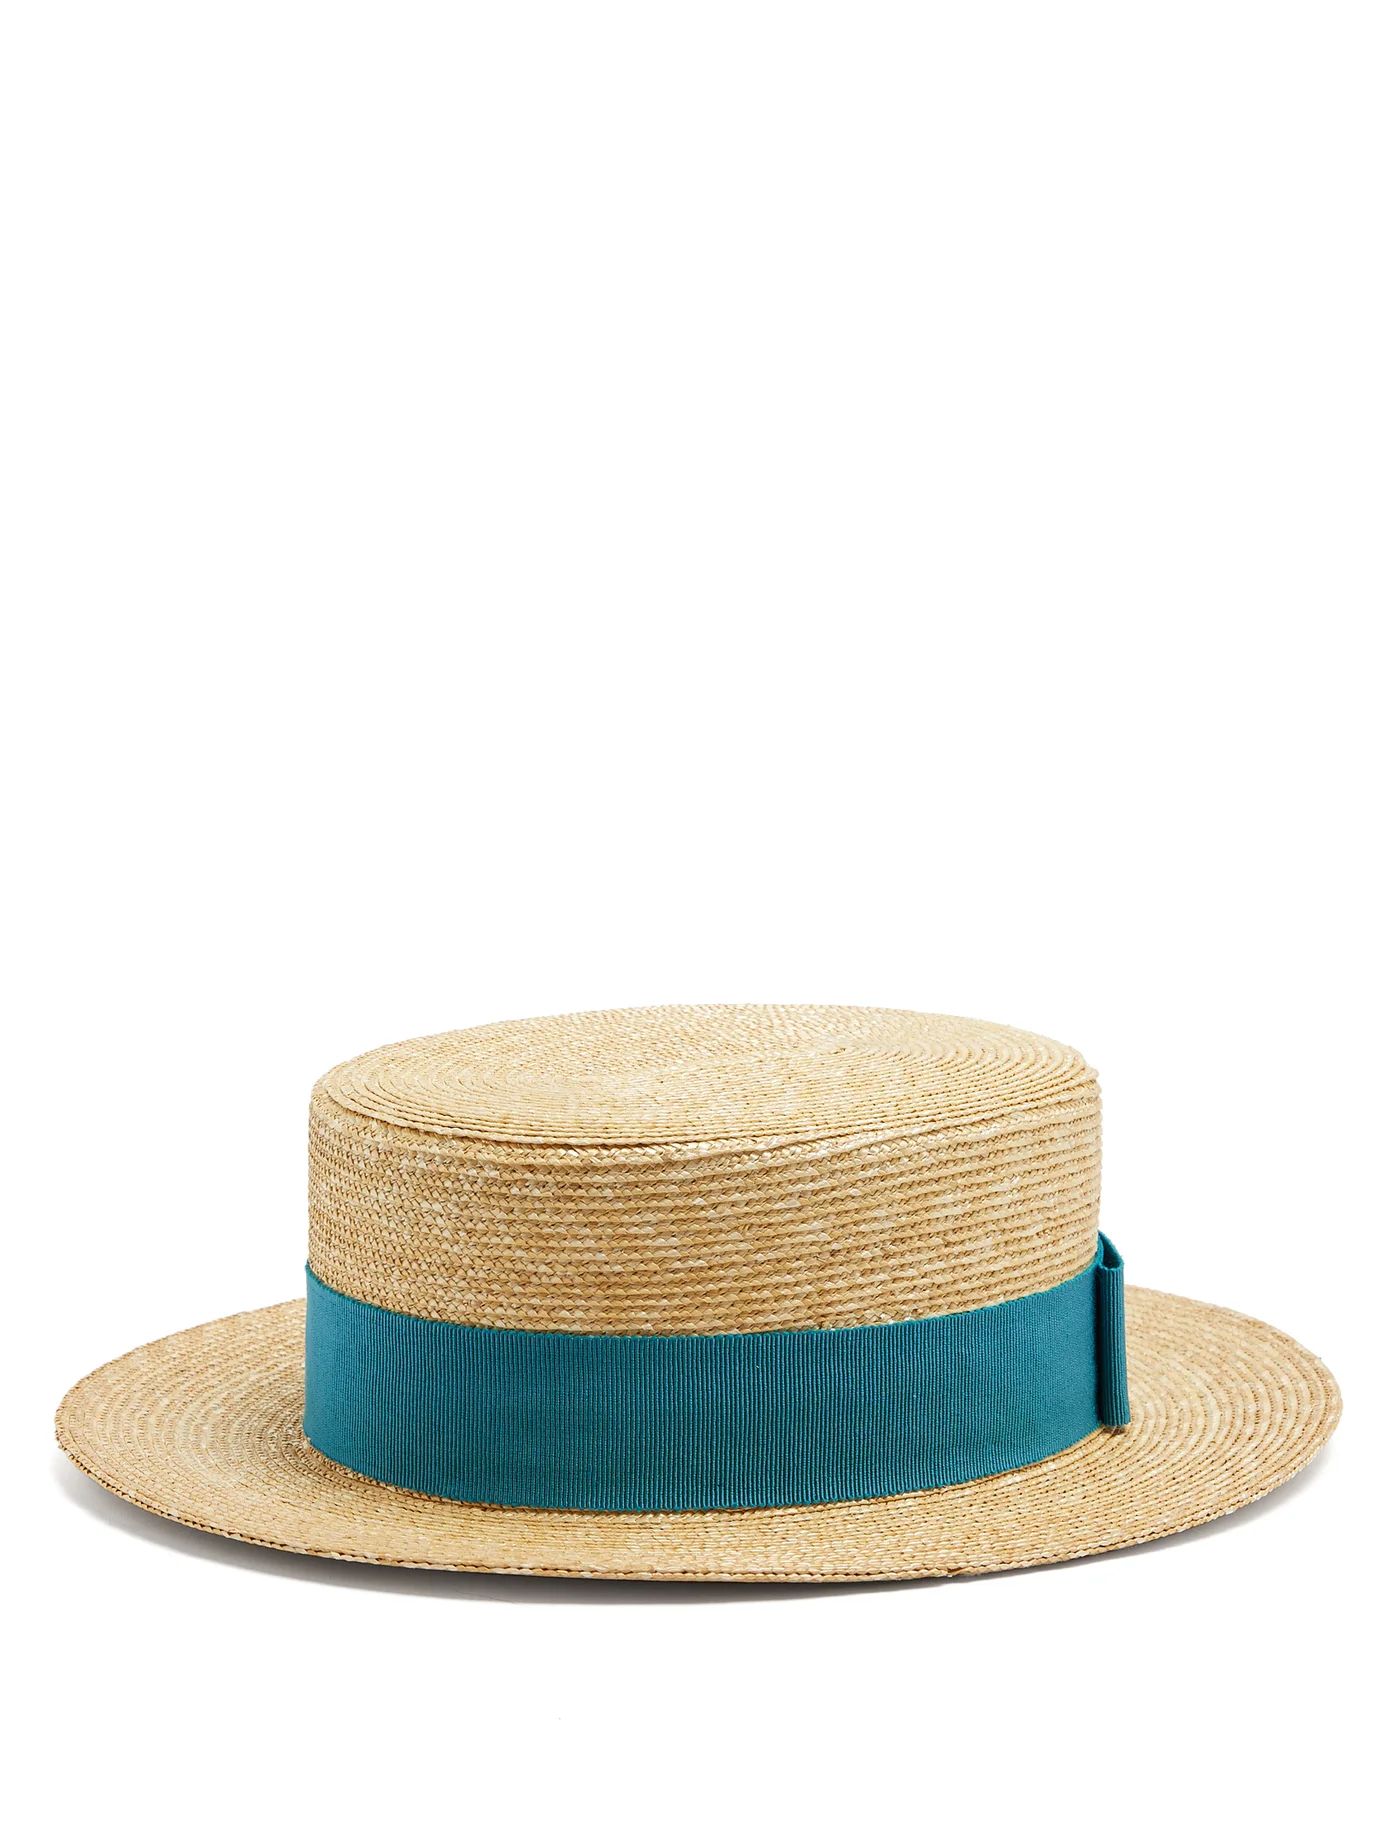 Straw boater hat | Matches (US)